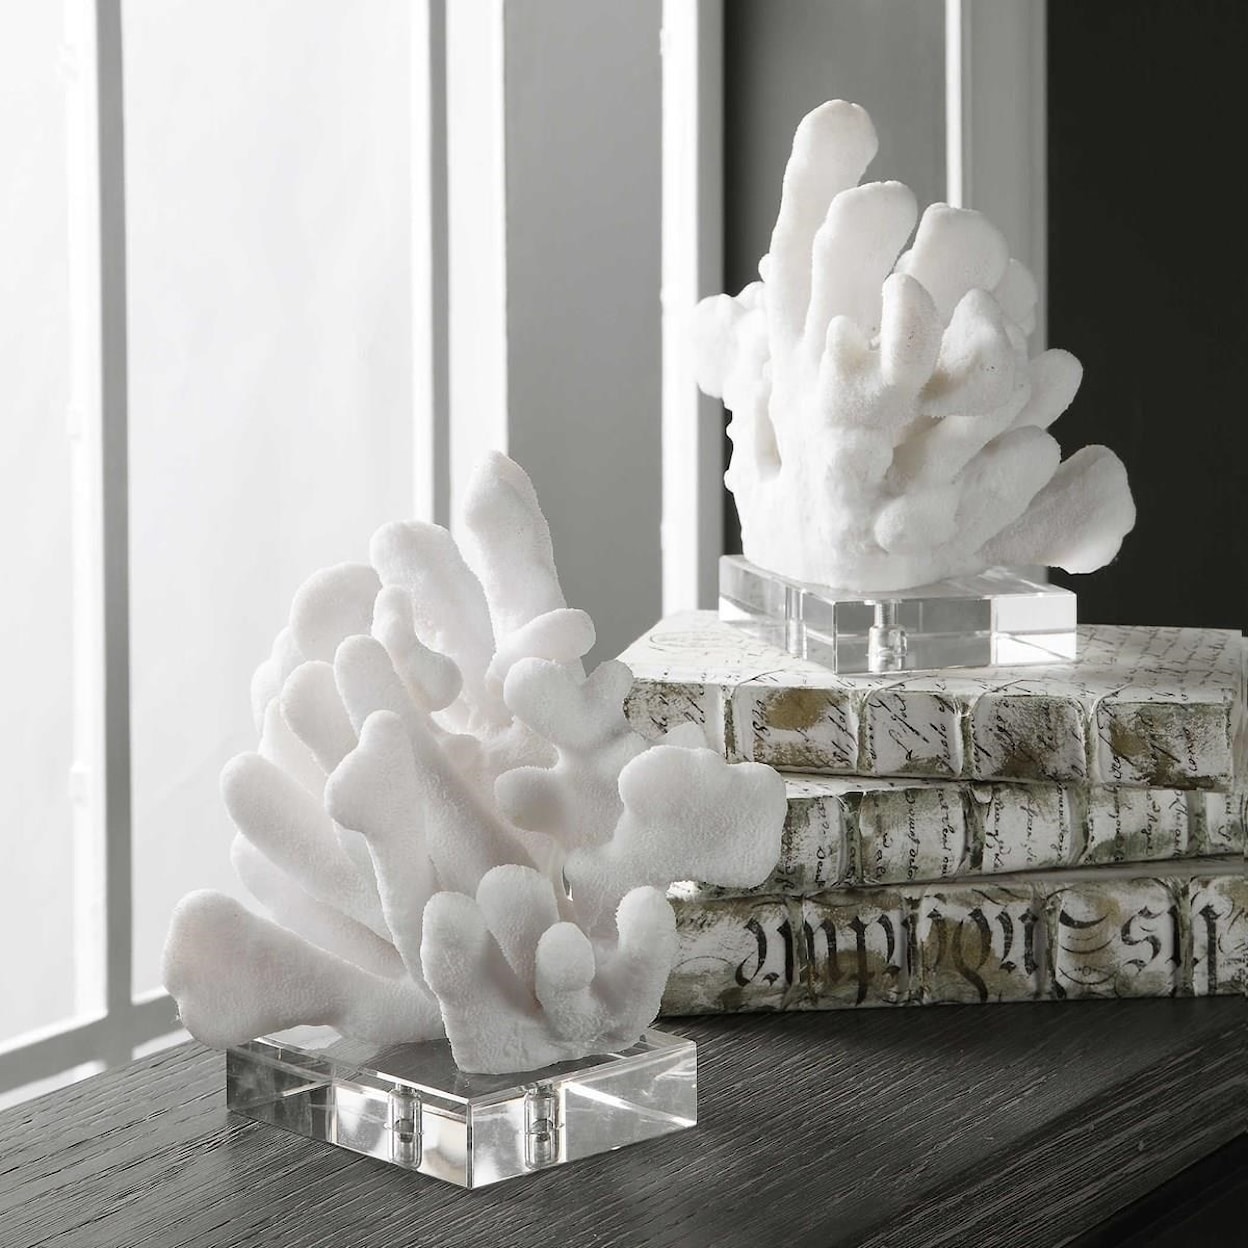 Uttermost Accessories Charbel White Bookends, Set/2